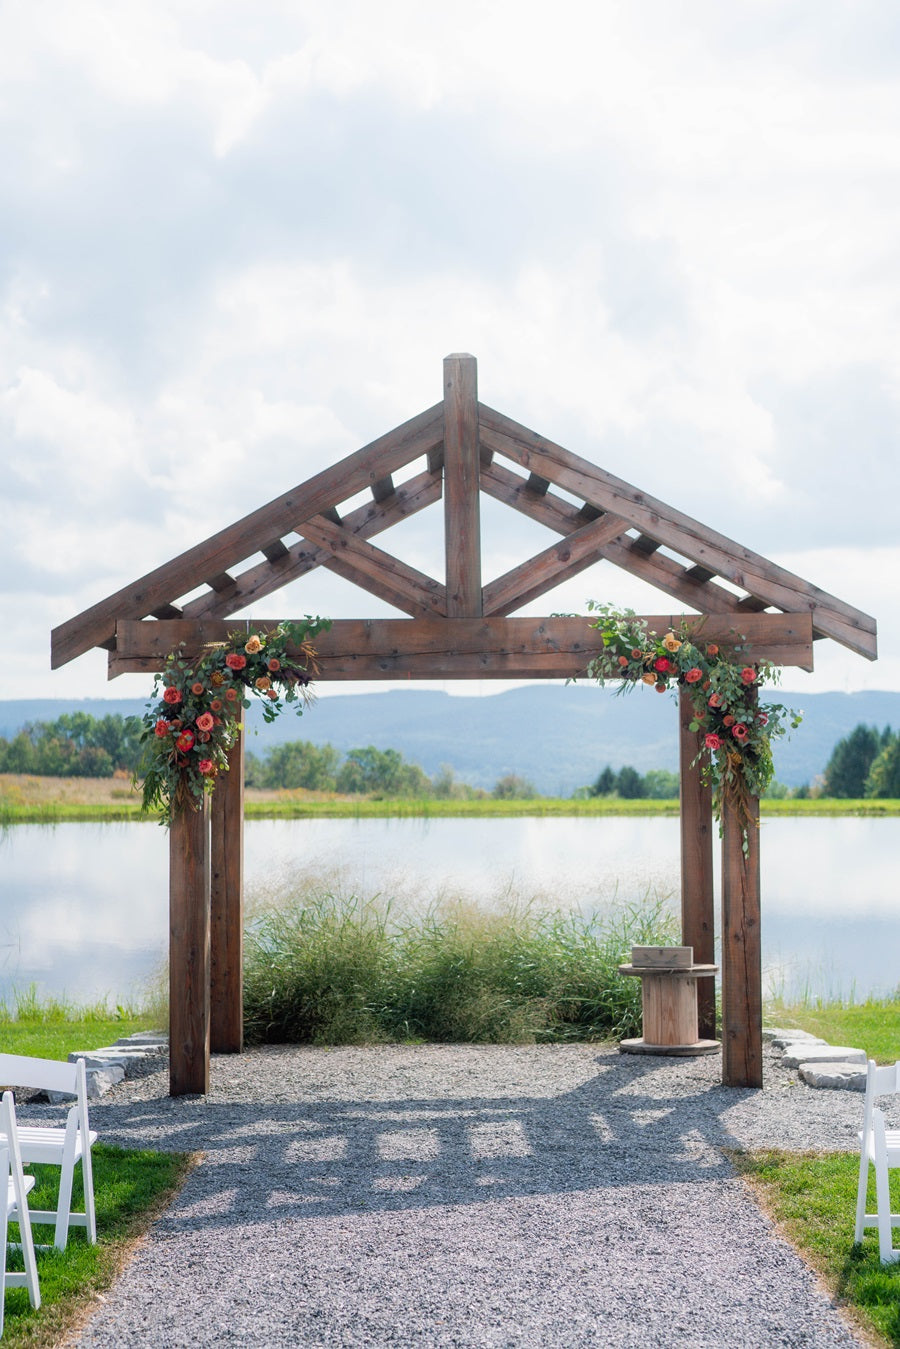 Arbor over a stone walkway at Wrens Roost Barn, over looking a small lake. Decorated with floral arch pieces on the left and right sides.